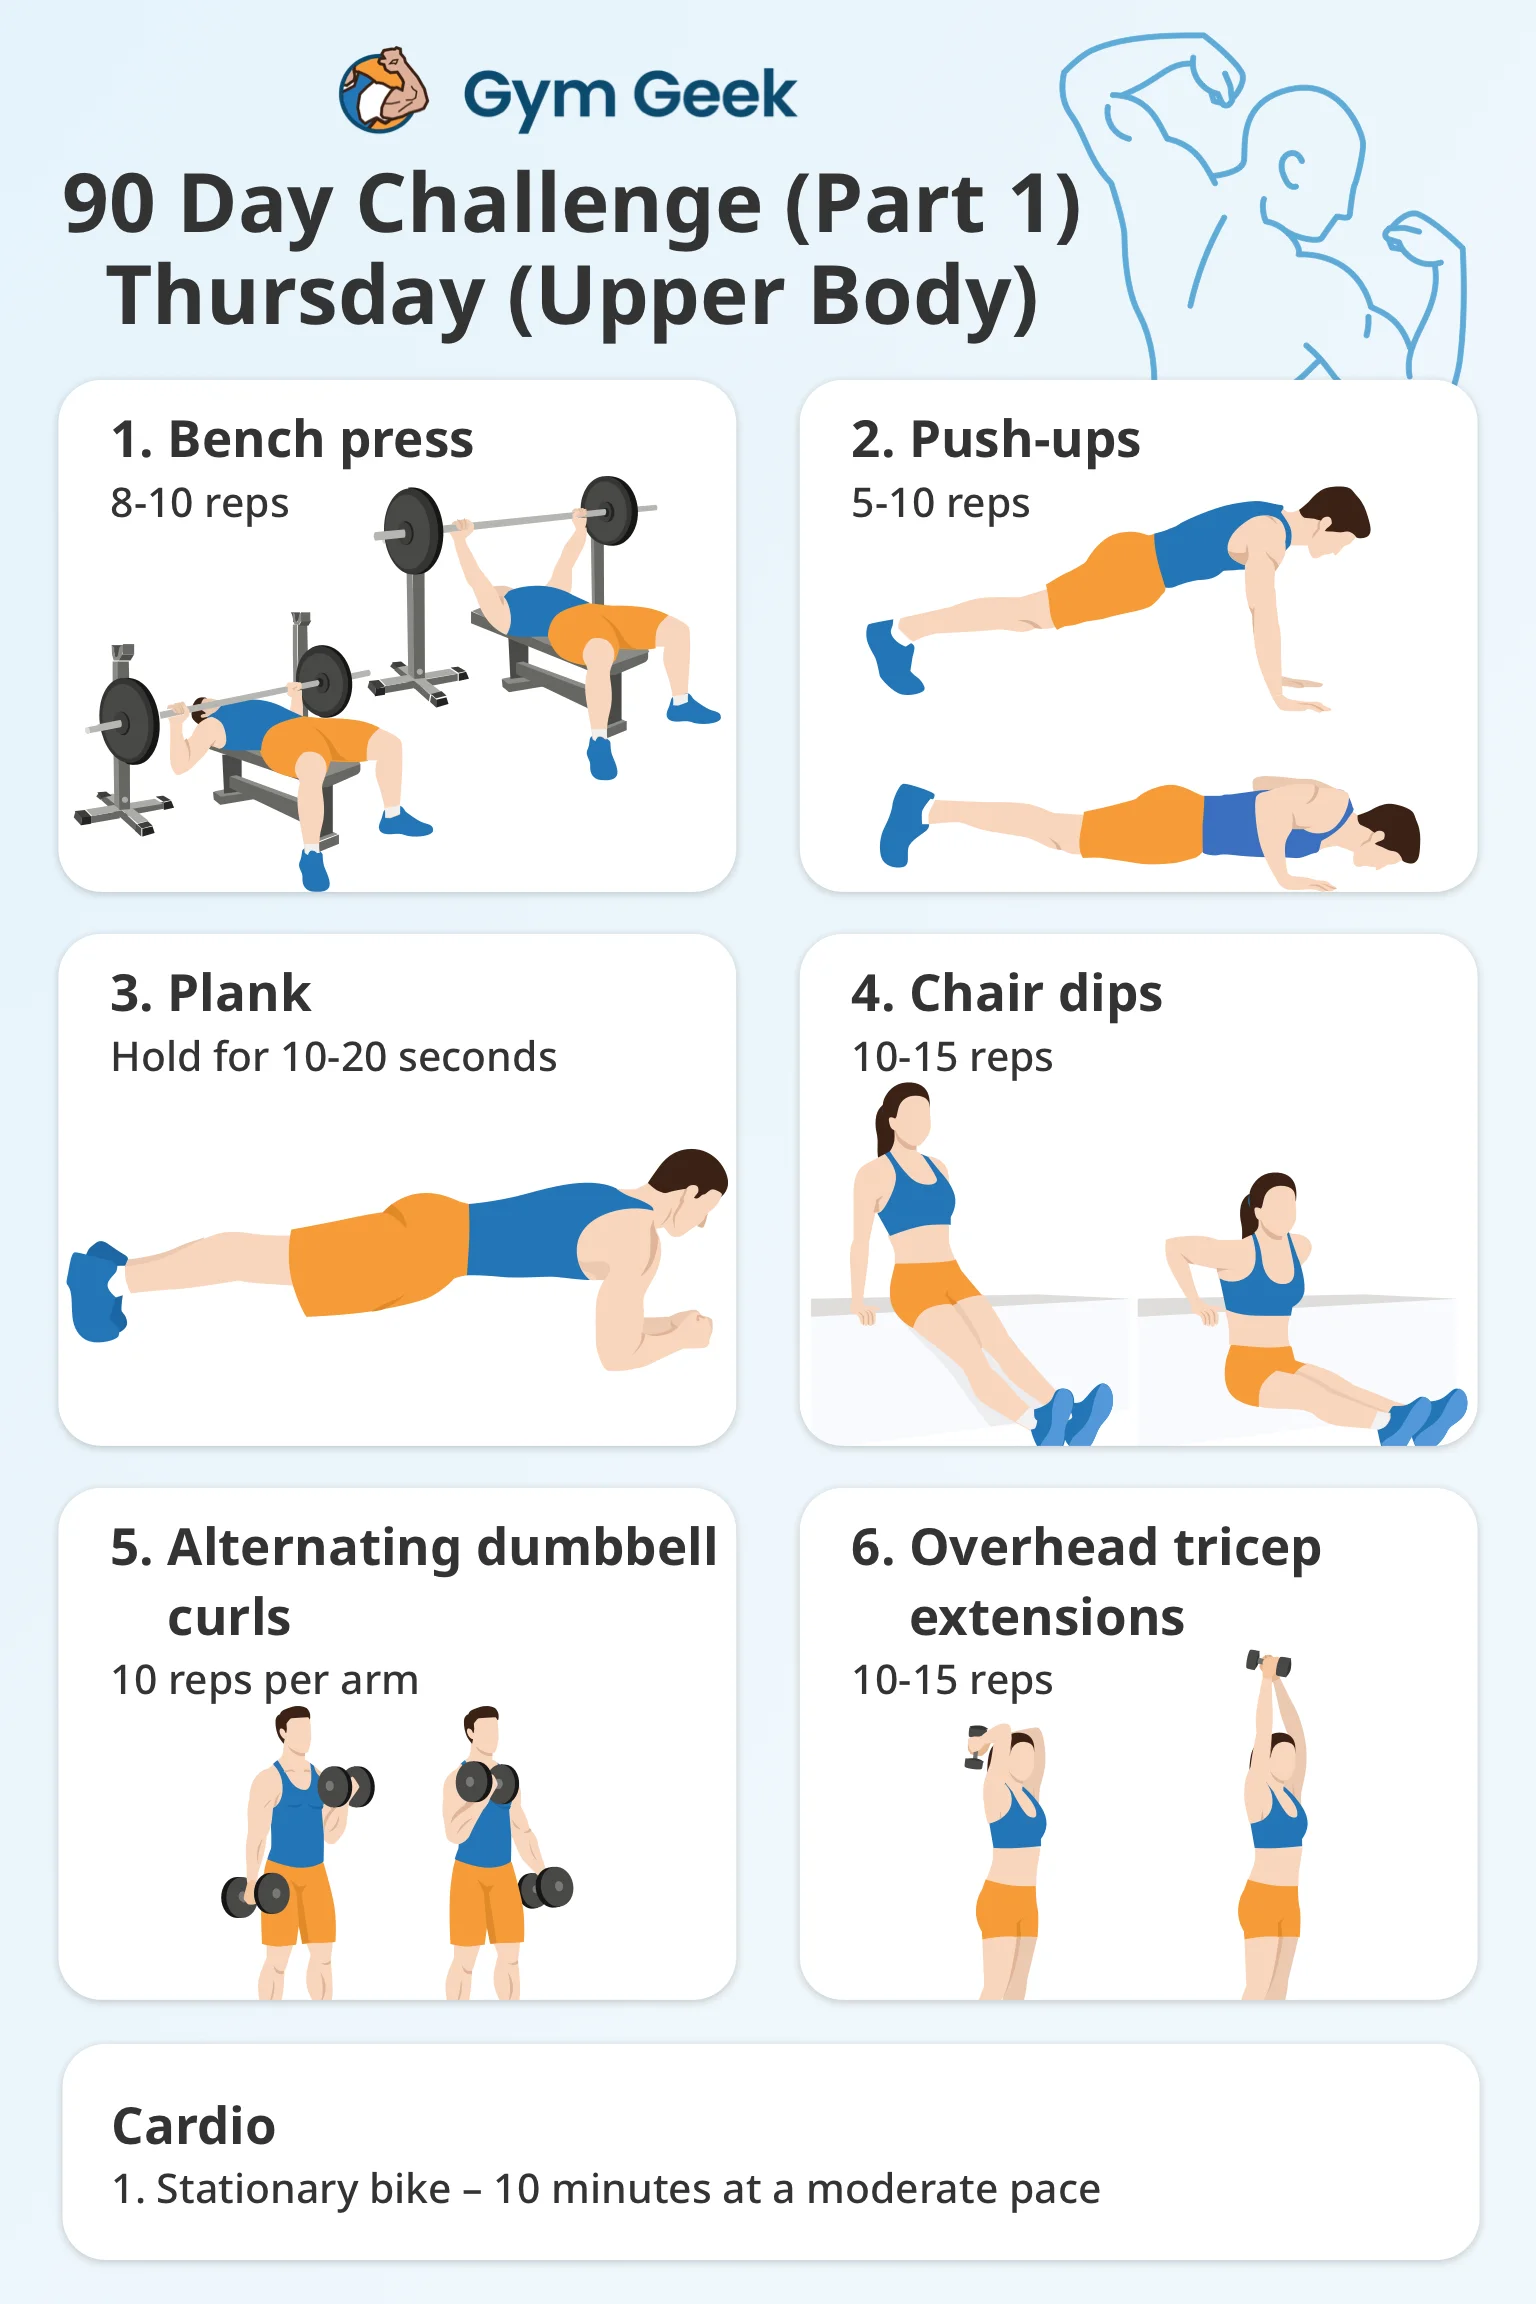 infographic - 90 day workout challenge, stage 1, Thursday (Upper Body)